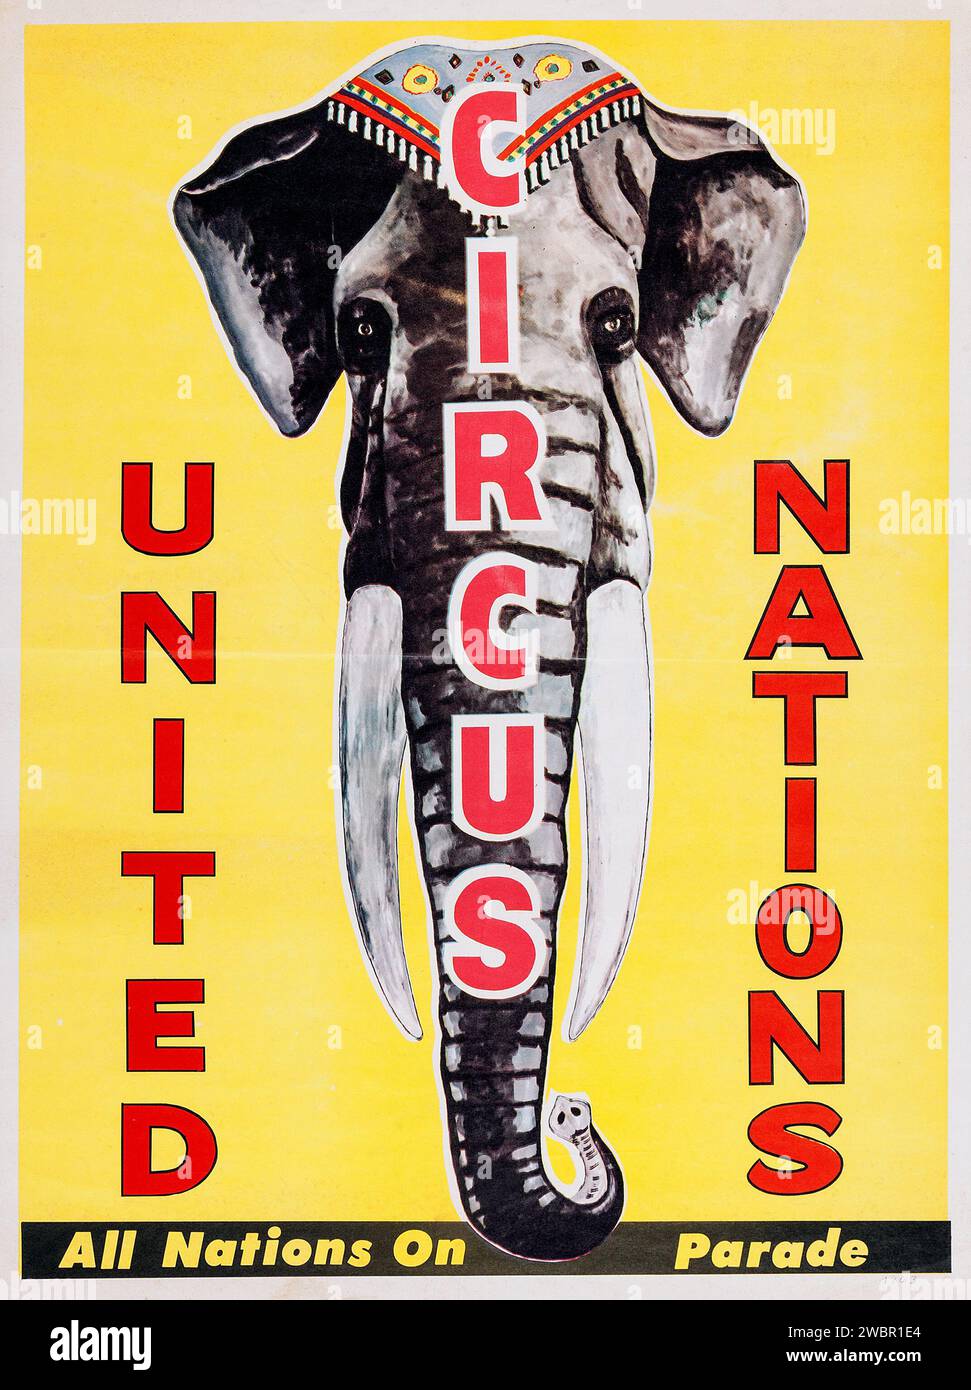 United Nations Circus Poster (United Nations, 1950s) feat a circus elephant Stock Photo